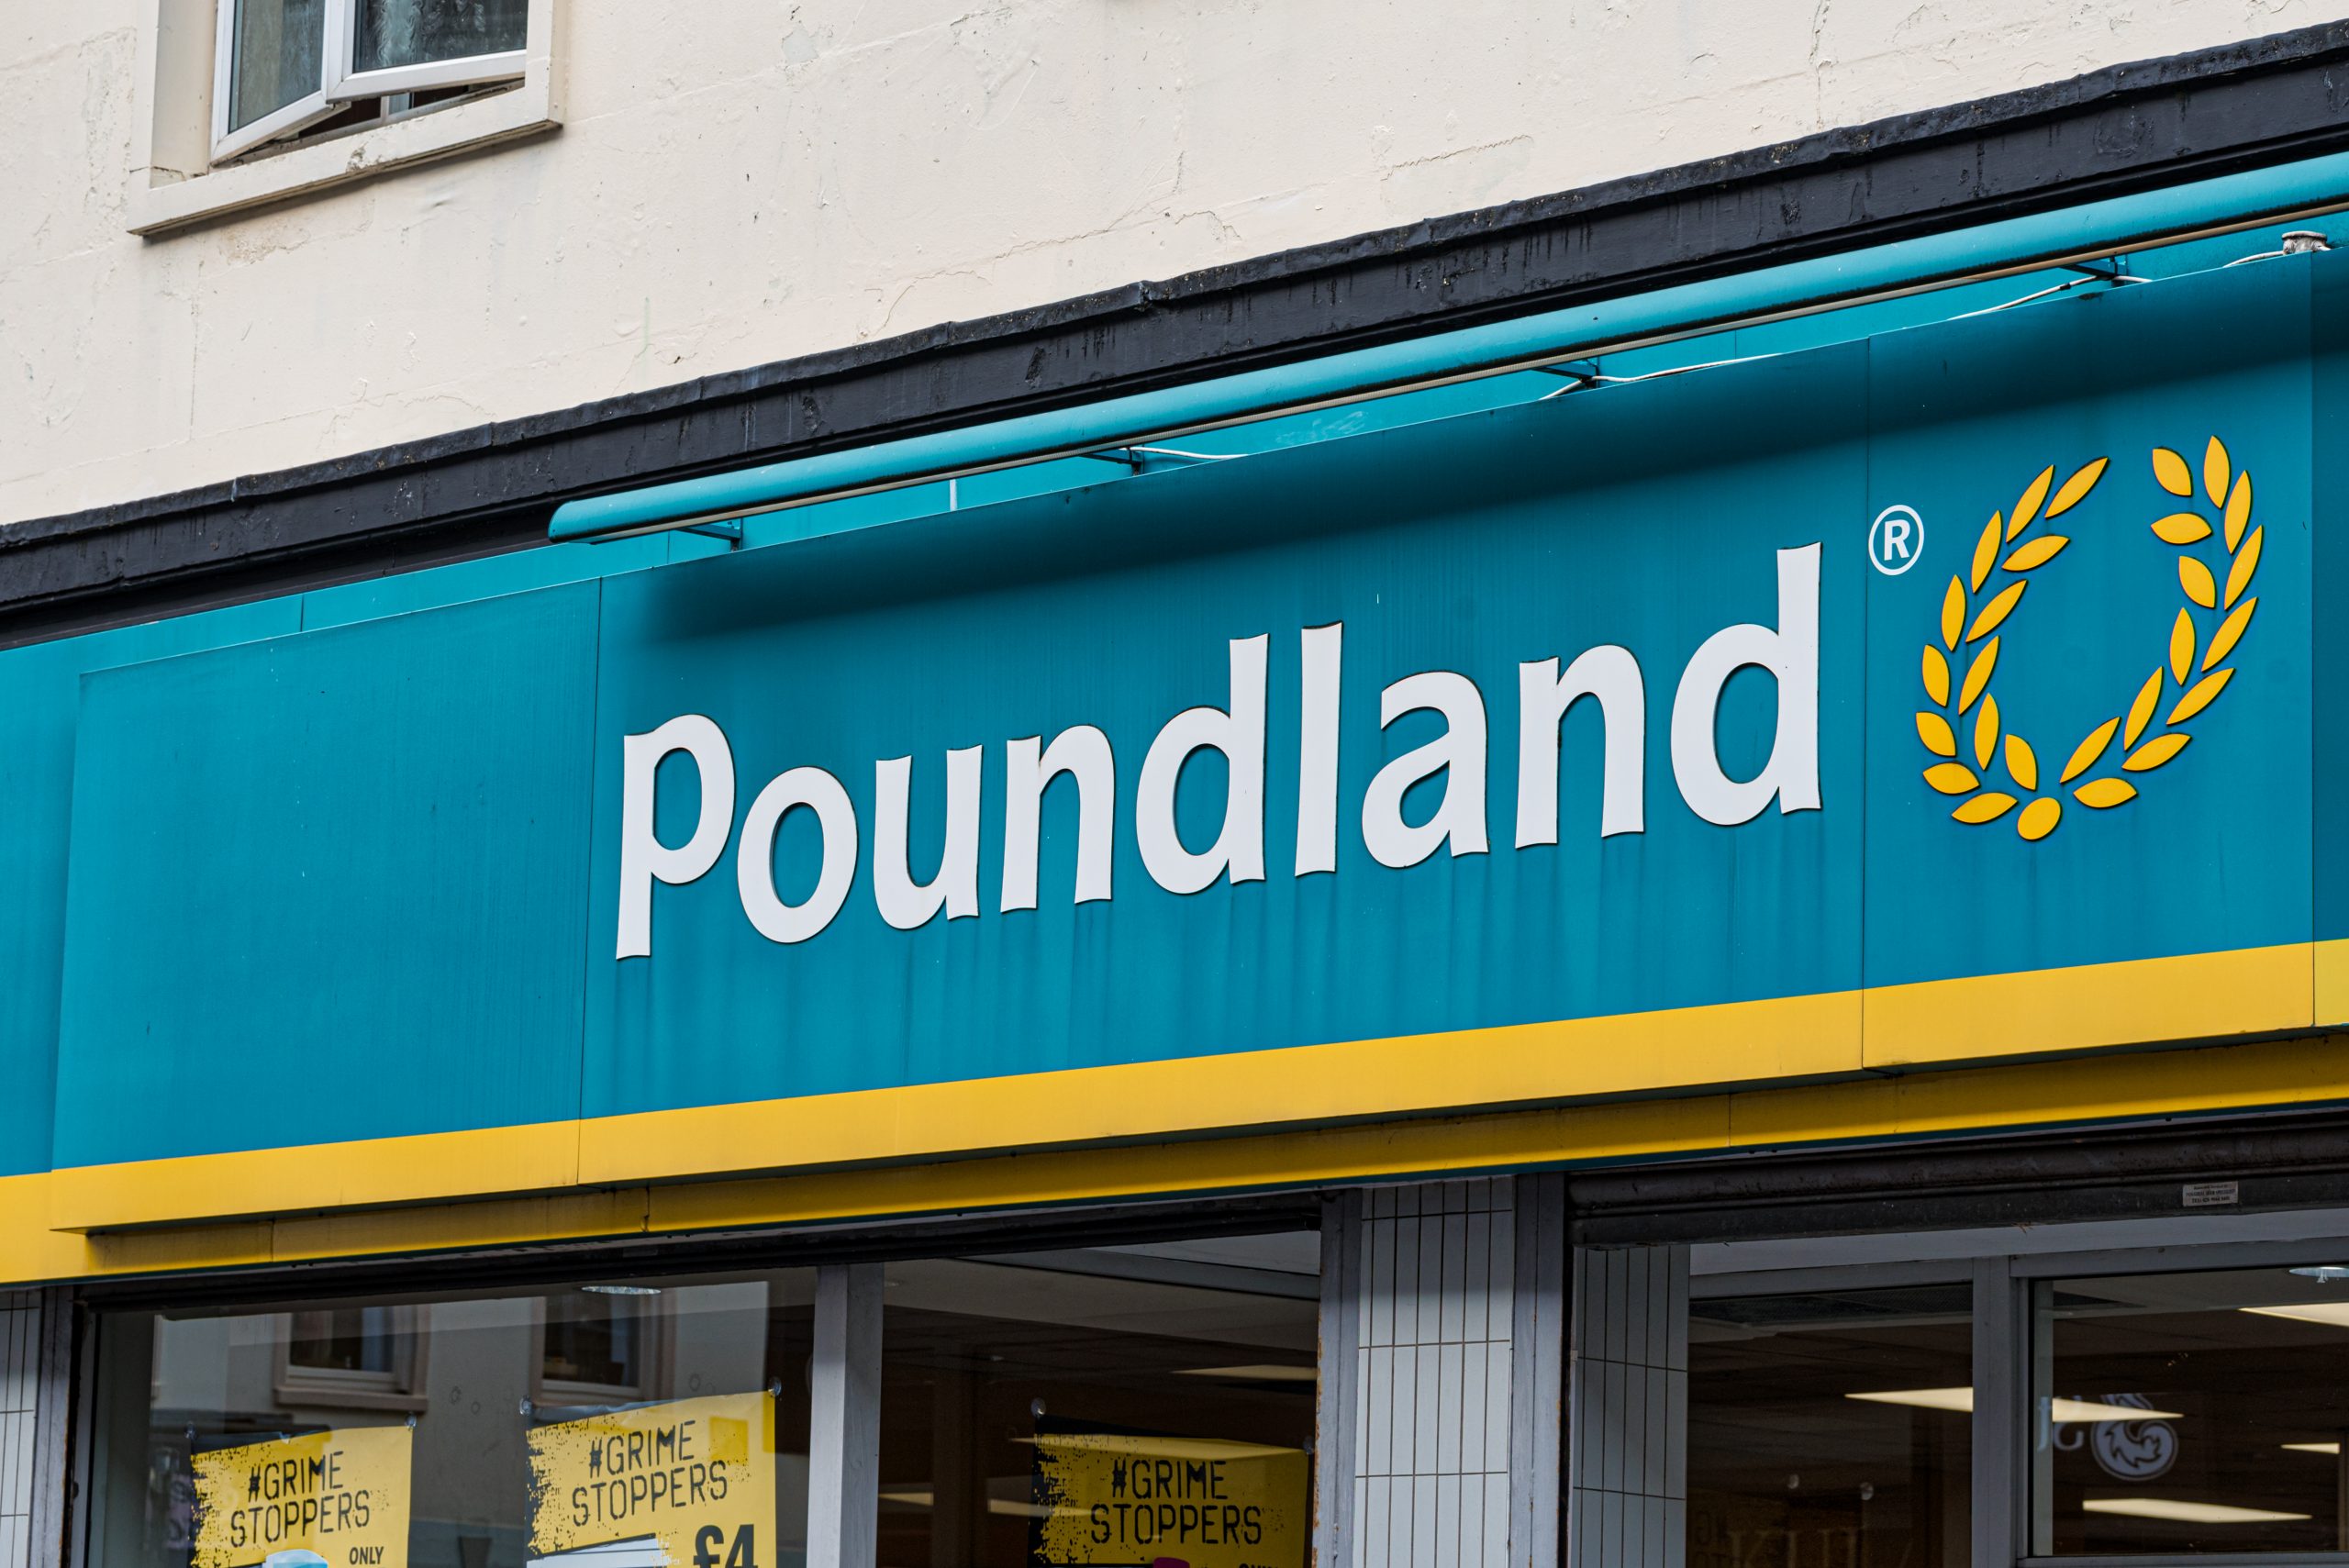 In for a penny, in for a Poundland